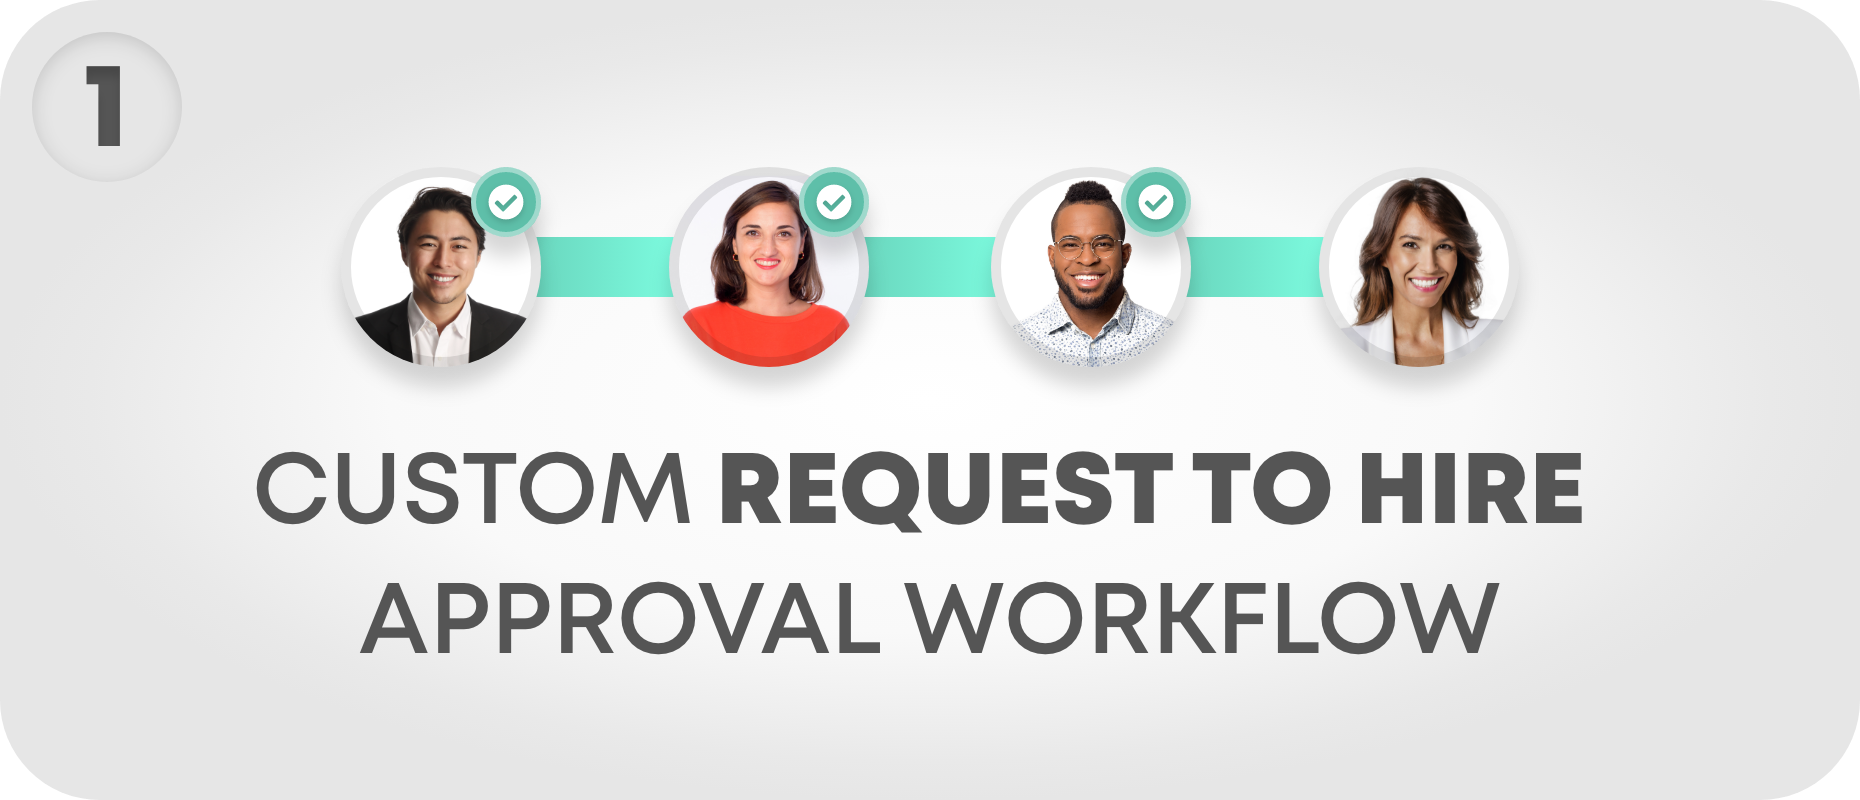 001.-Custom-Request-To-Hire-Approval-Workflow